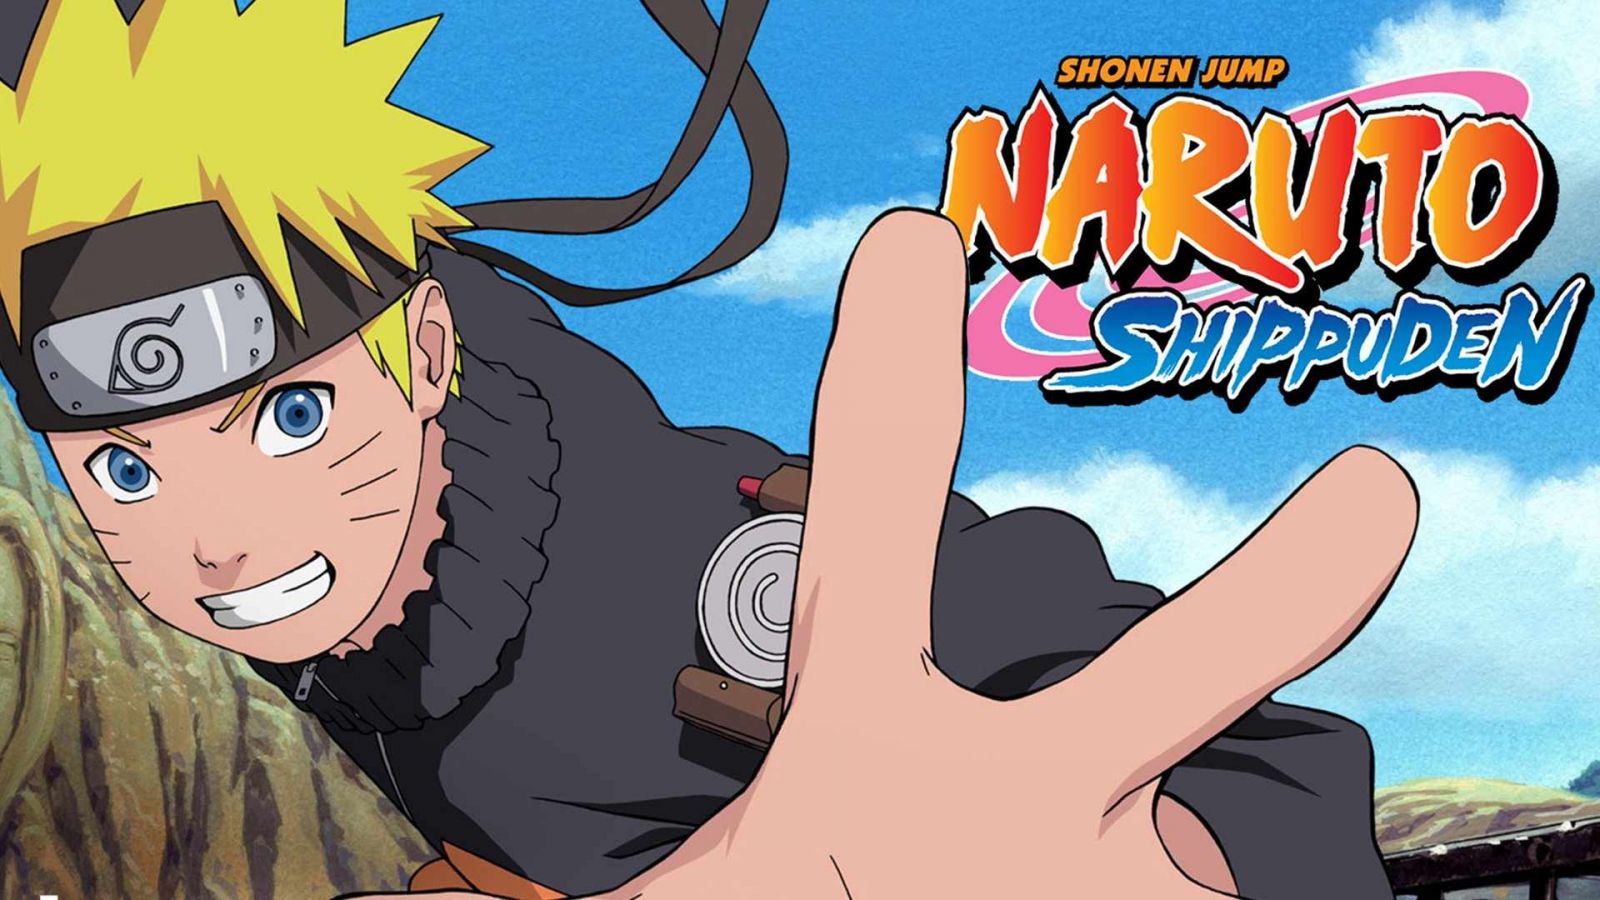 watch free online naruto episodes english dubbed